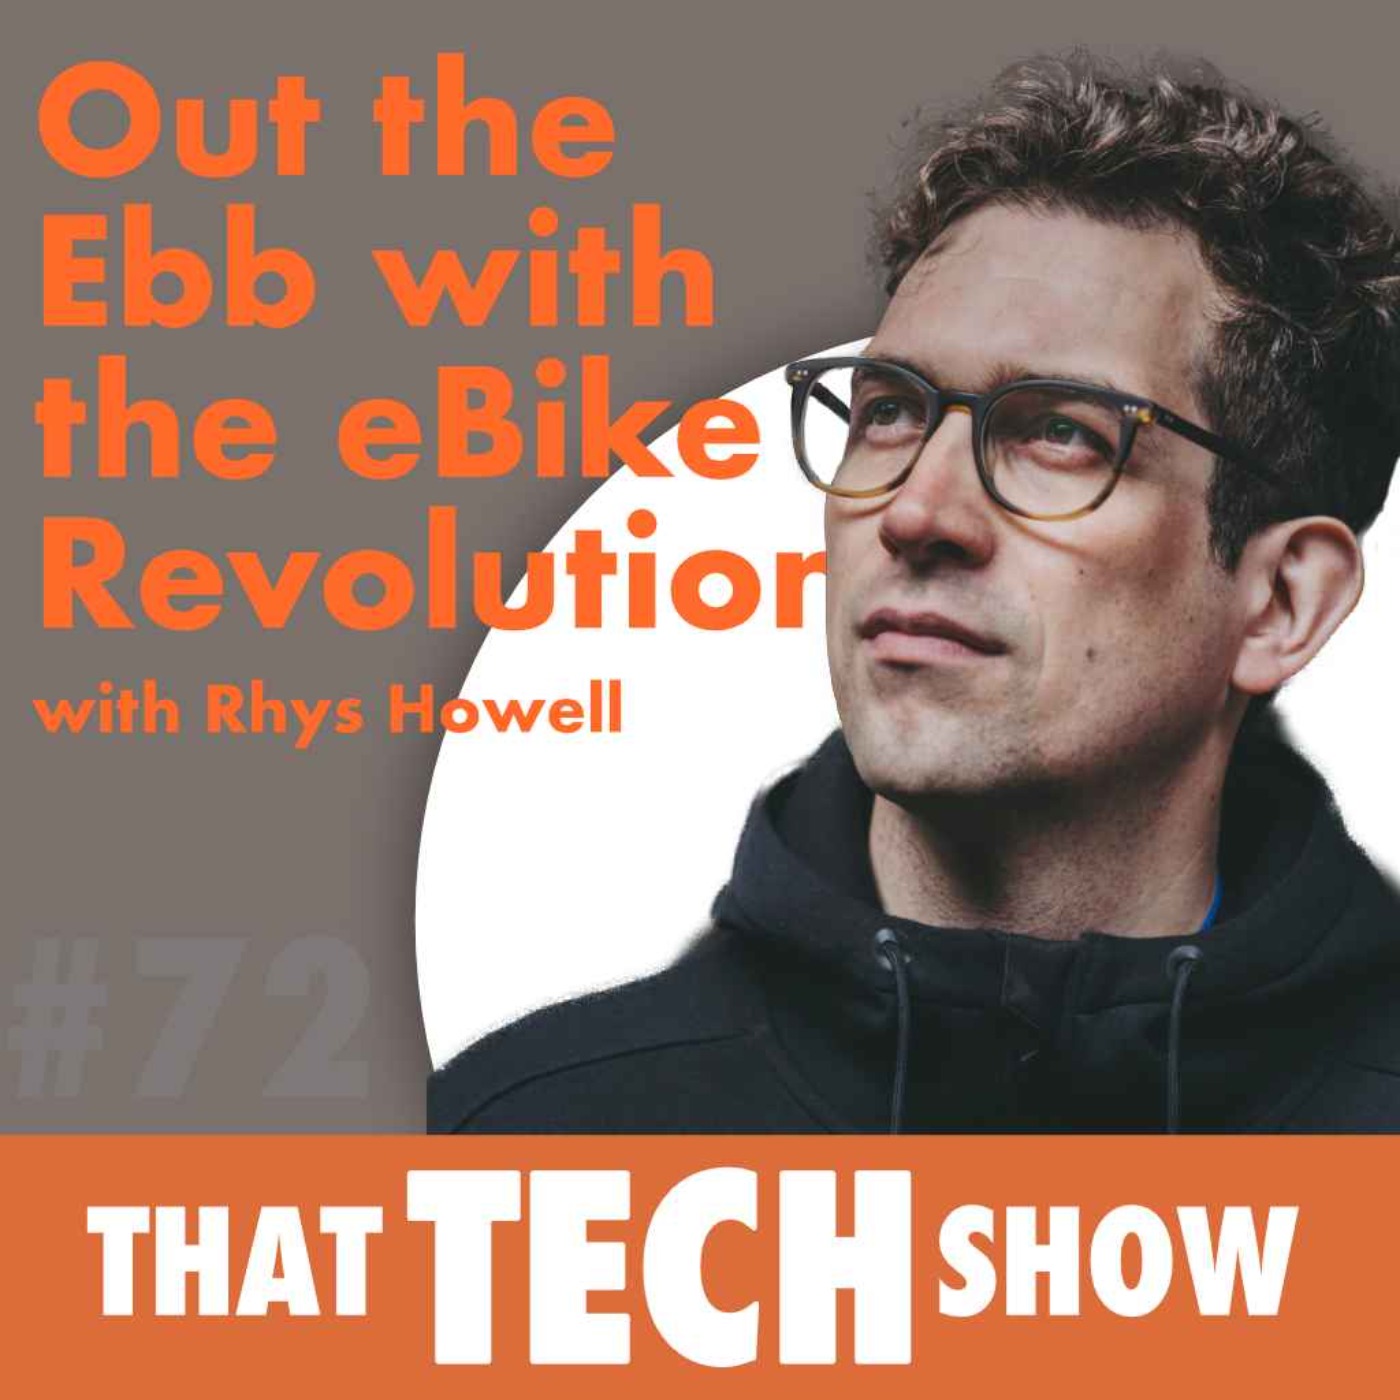 Episode 72 - Out the Ebb with the eBike Revolution with Rhys Howell